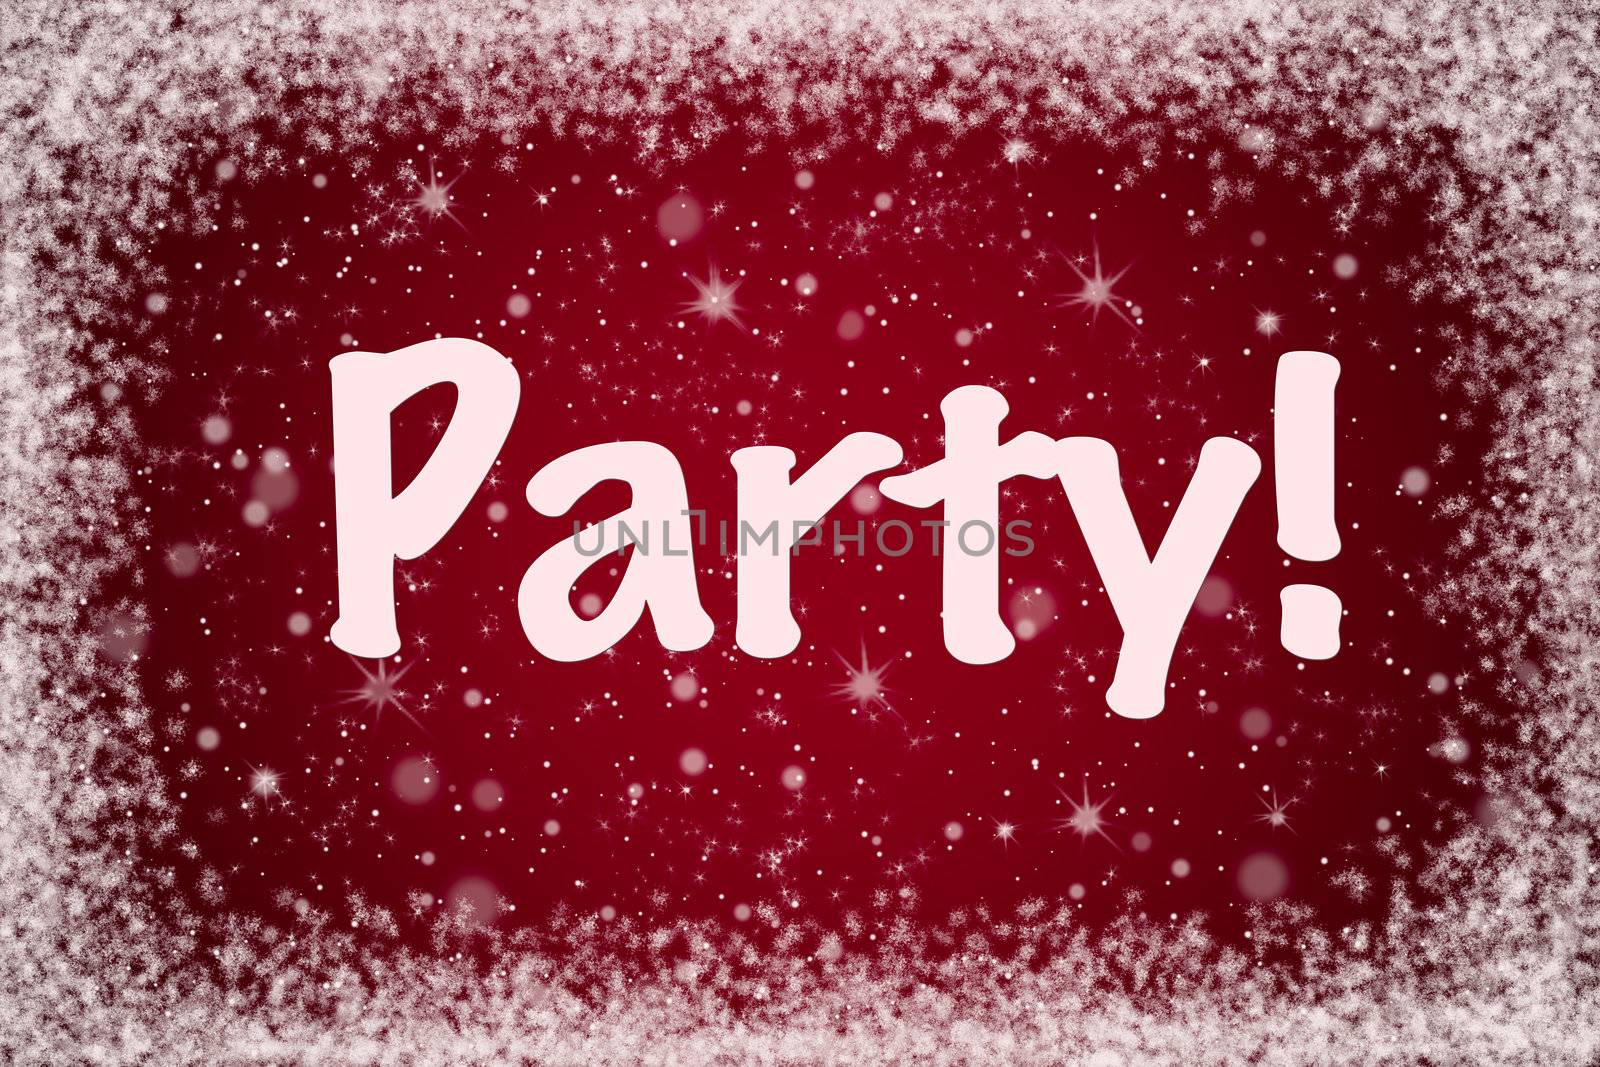 Winter Party Invitation on Red Sparkly Snow Background